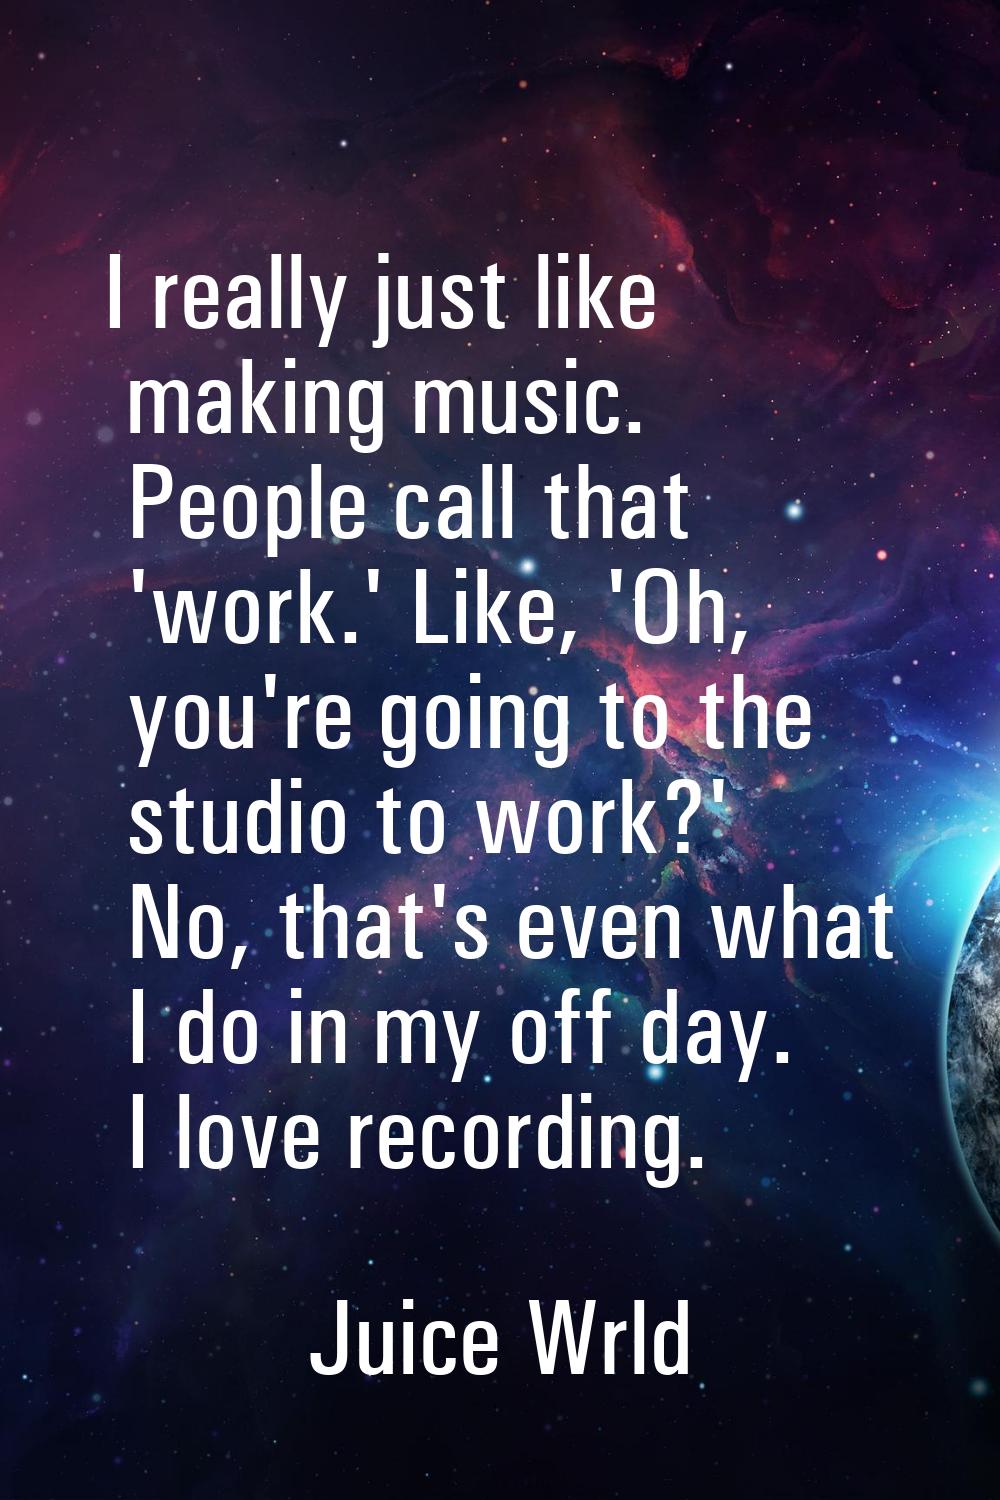 I really just like making music. People call that 'work.' Like, 'Oh, you're going to the studio to 